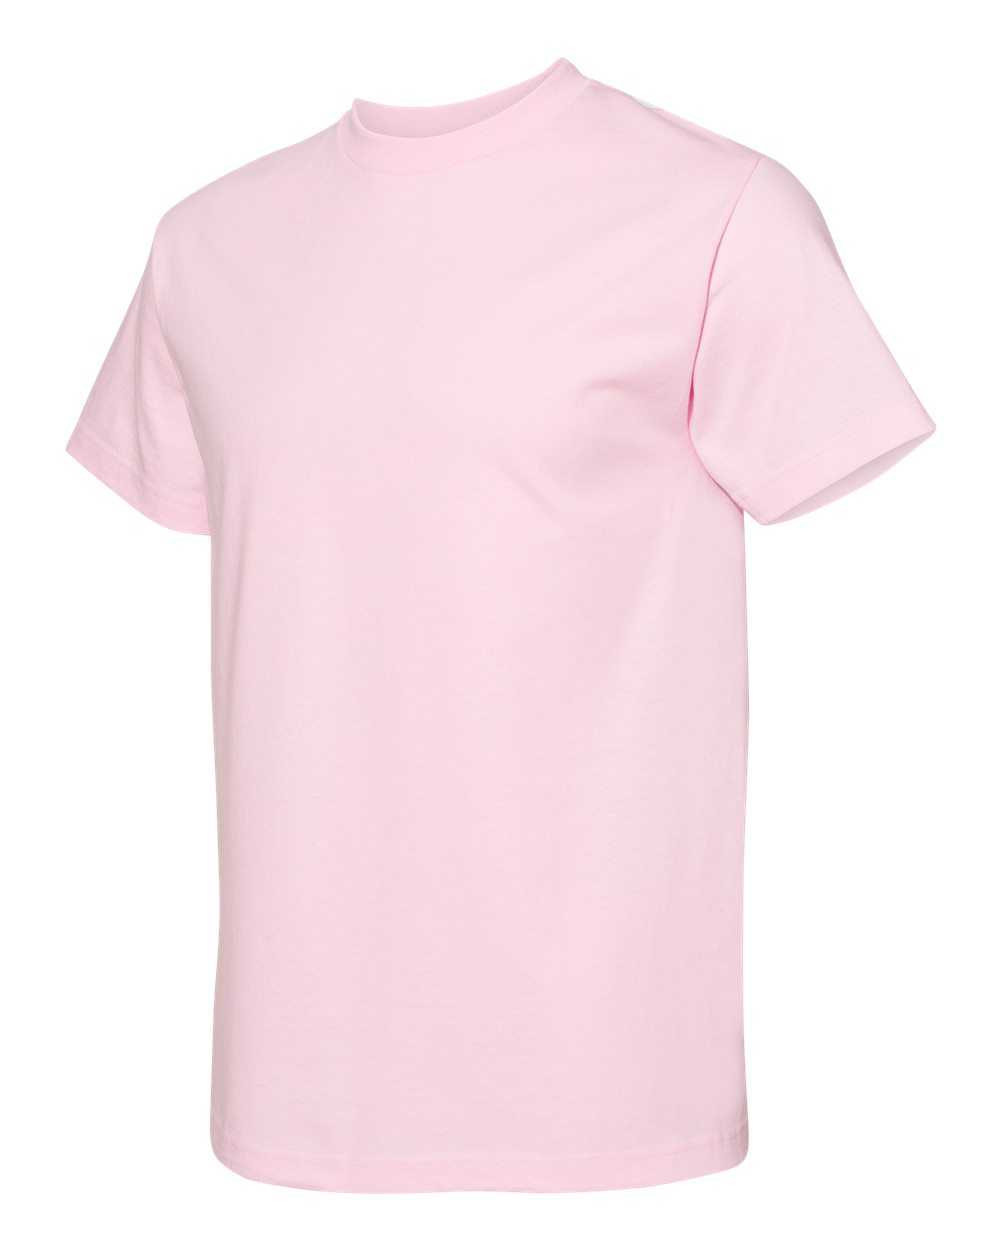 American Apparel 1301 Unisex Heavyweight Cotton T-Shirt - Pink - HIT a Double